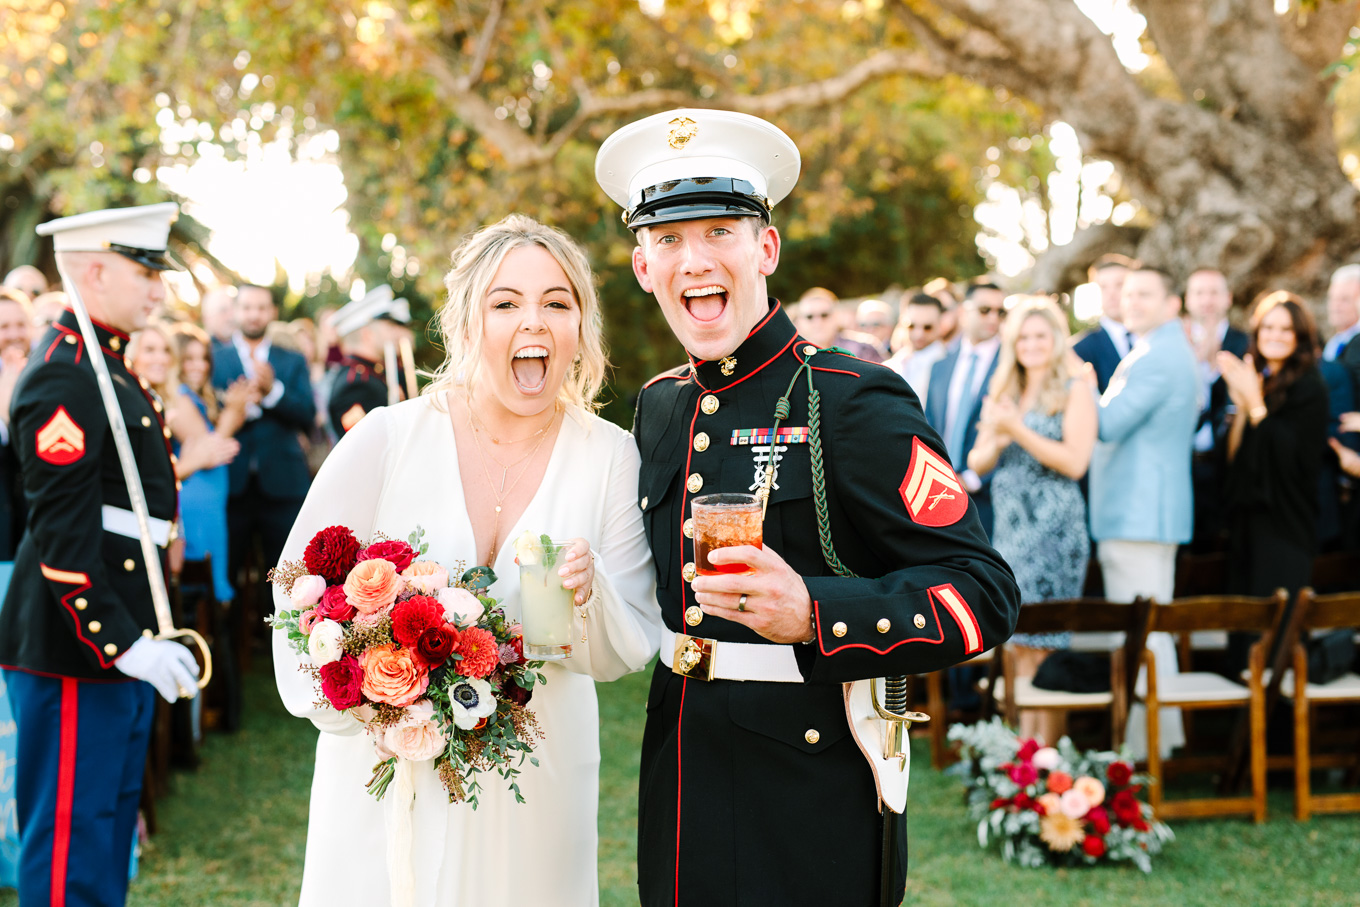 Bride and Marine groom leaving Adamson House Malibu wedding ceremony | Best Southern California Garden Wedding Venues | Colorful and elevated wedding photography for fun-loving couples | #gardenvenue #weddingvenue #socalweddingvenue #bouquetideas #uniquebouquet   Source: Mary Costa Photography | Los Angeles 